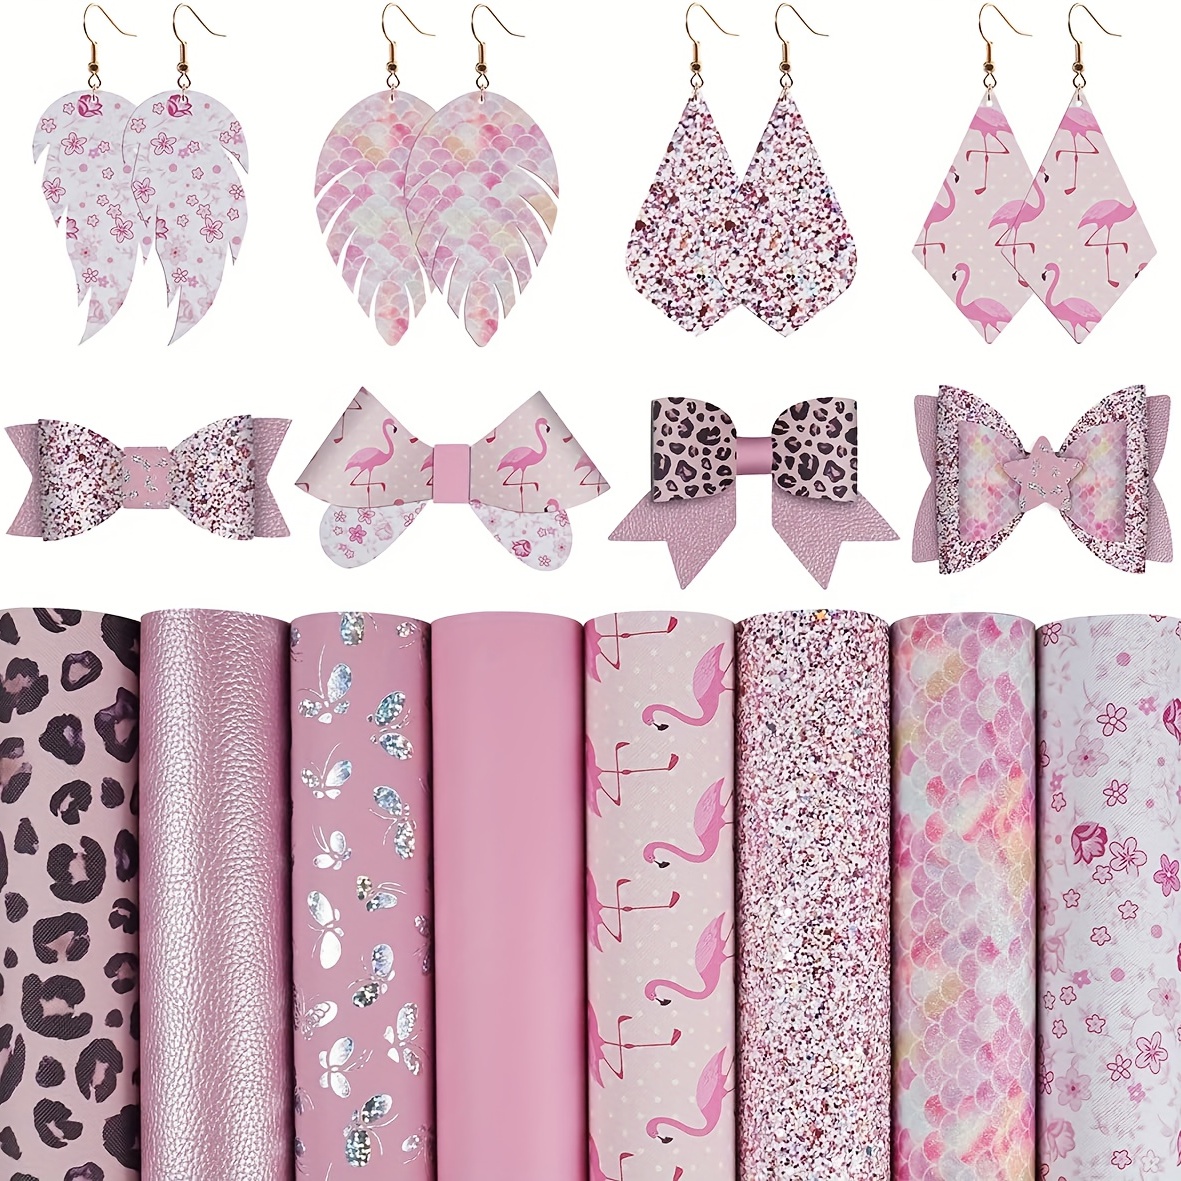 

8pcs 8x12 Inch (20x30cm) Faux Leather Sheets Mixed Pink Series Fine Chunky Glitter Litchi Flamingo Leopard Butterfly Flower Faux Leather Fabric For Leather Bows And Earrings Making